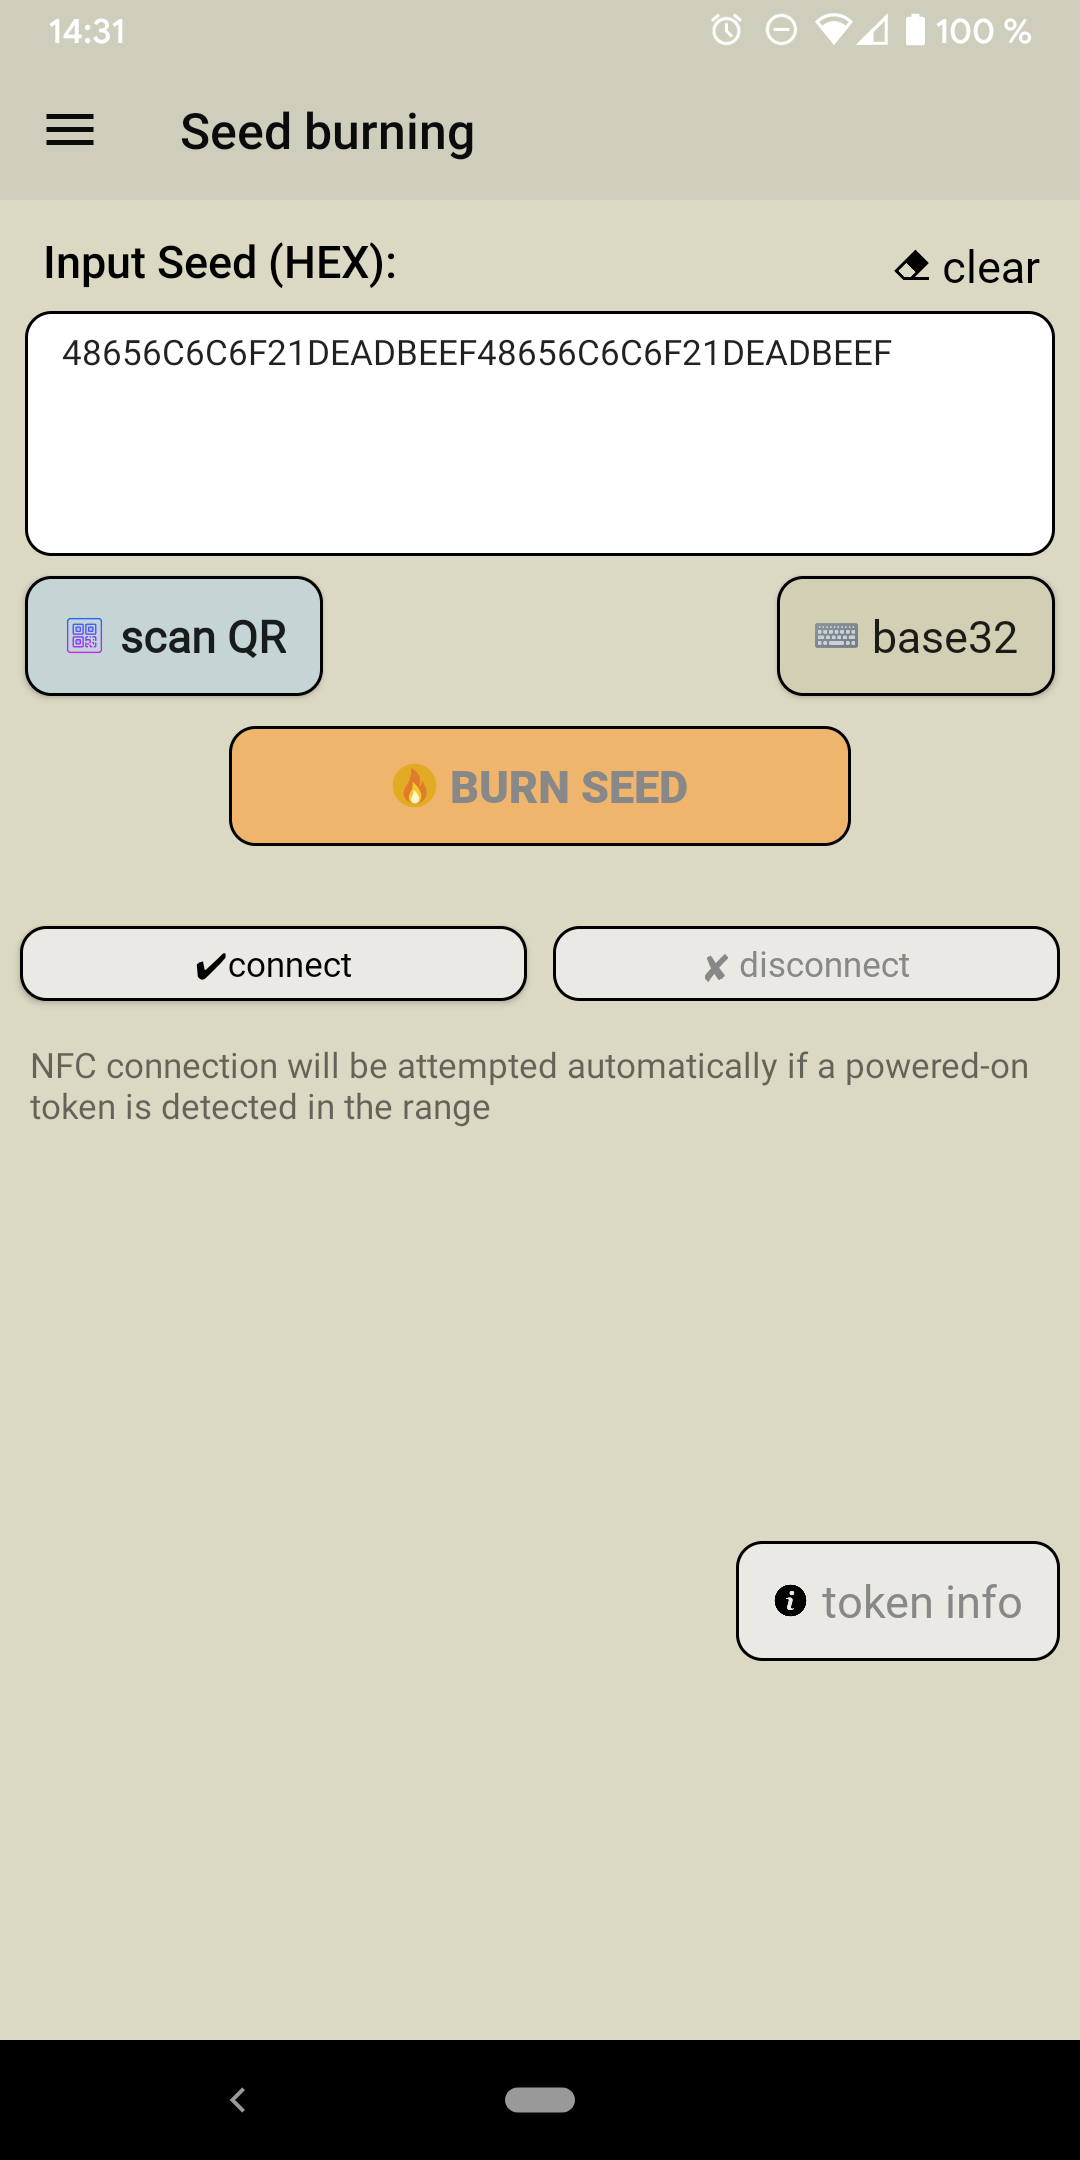 Seed burning view of the NFC burner 2 Android app